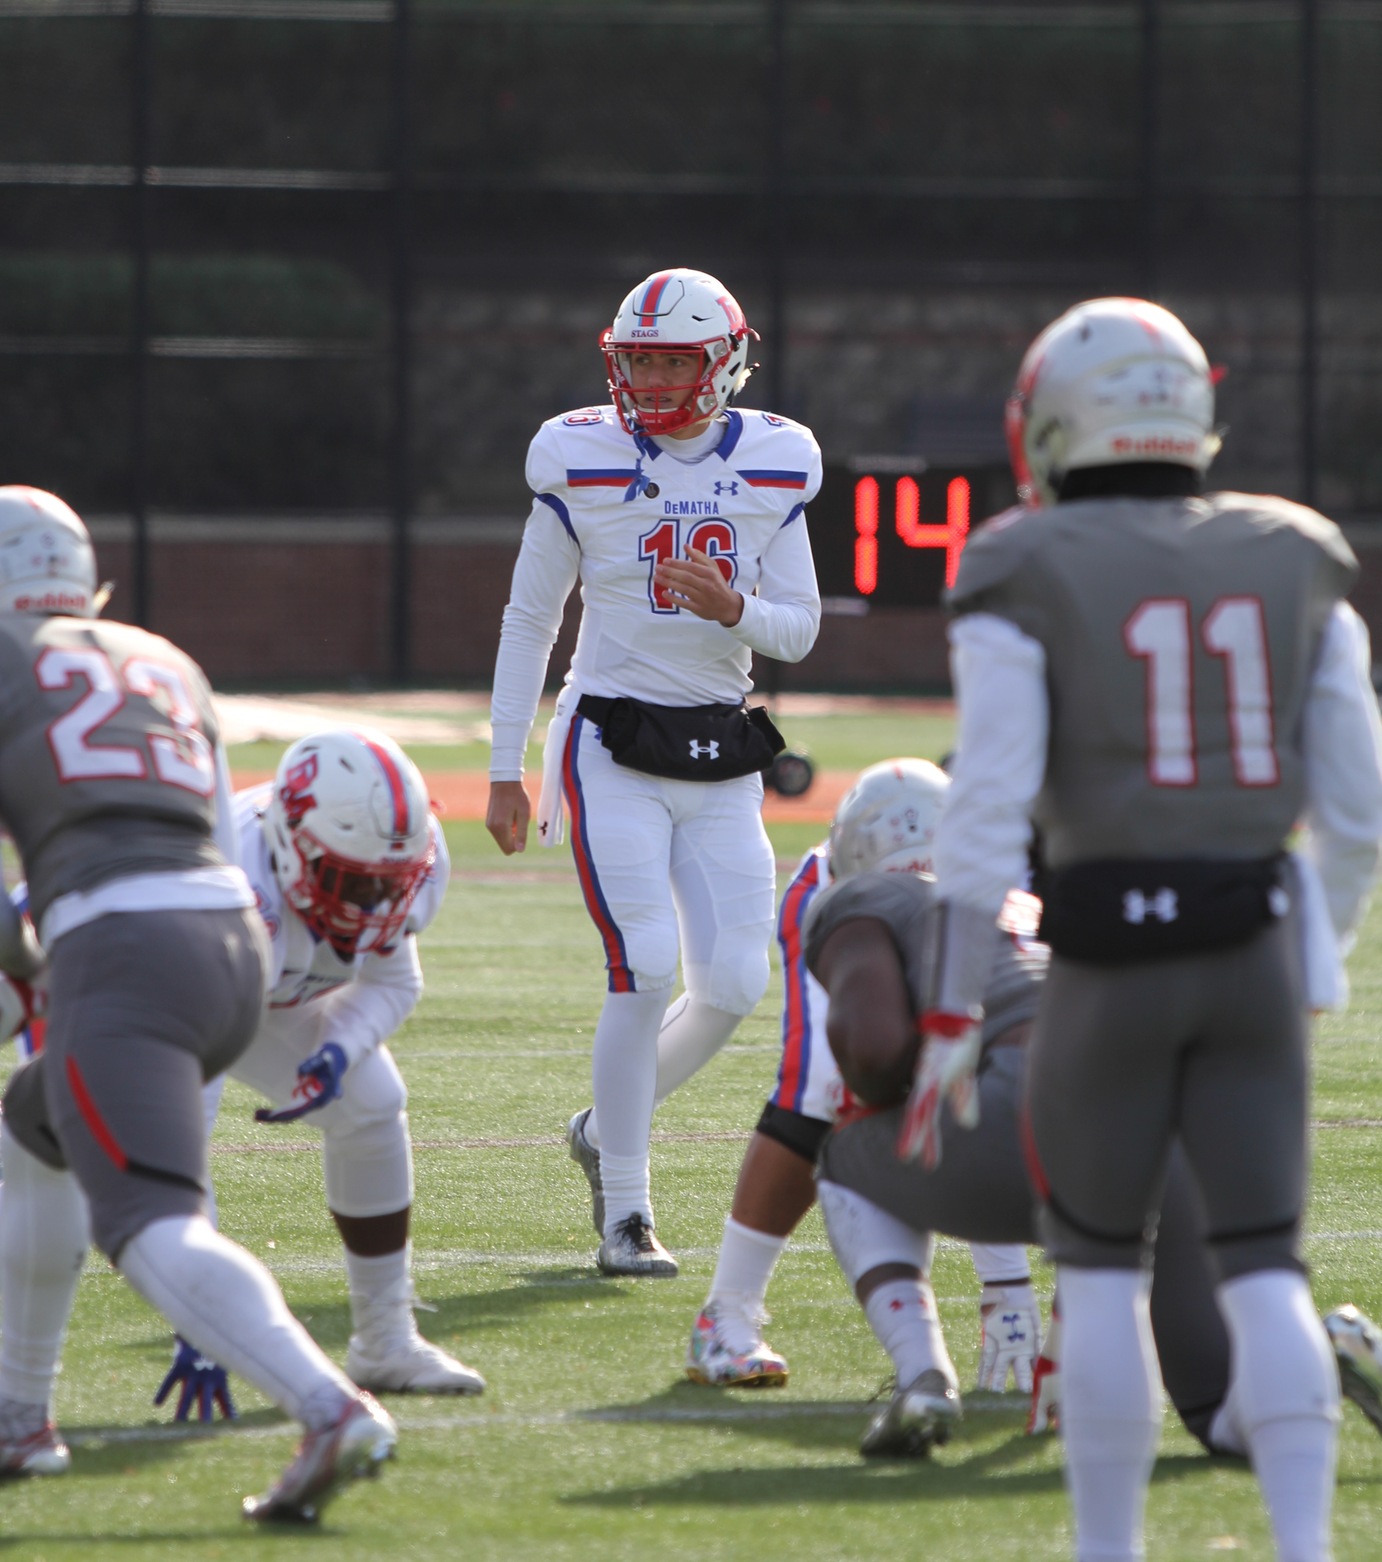 Senior DeMatha Quarterback Eric Najarian has the Stags offense moving in the right direction. (Picture from last season)